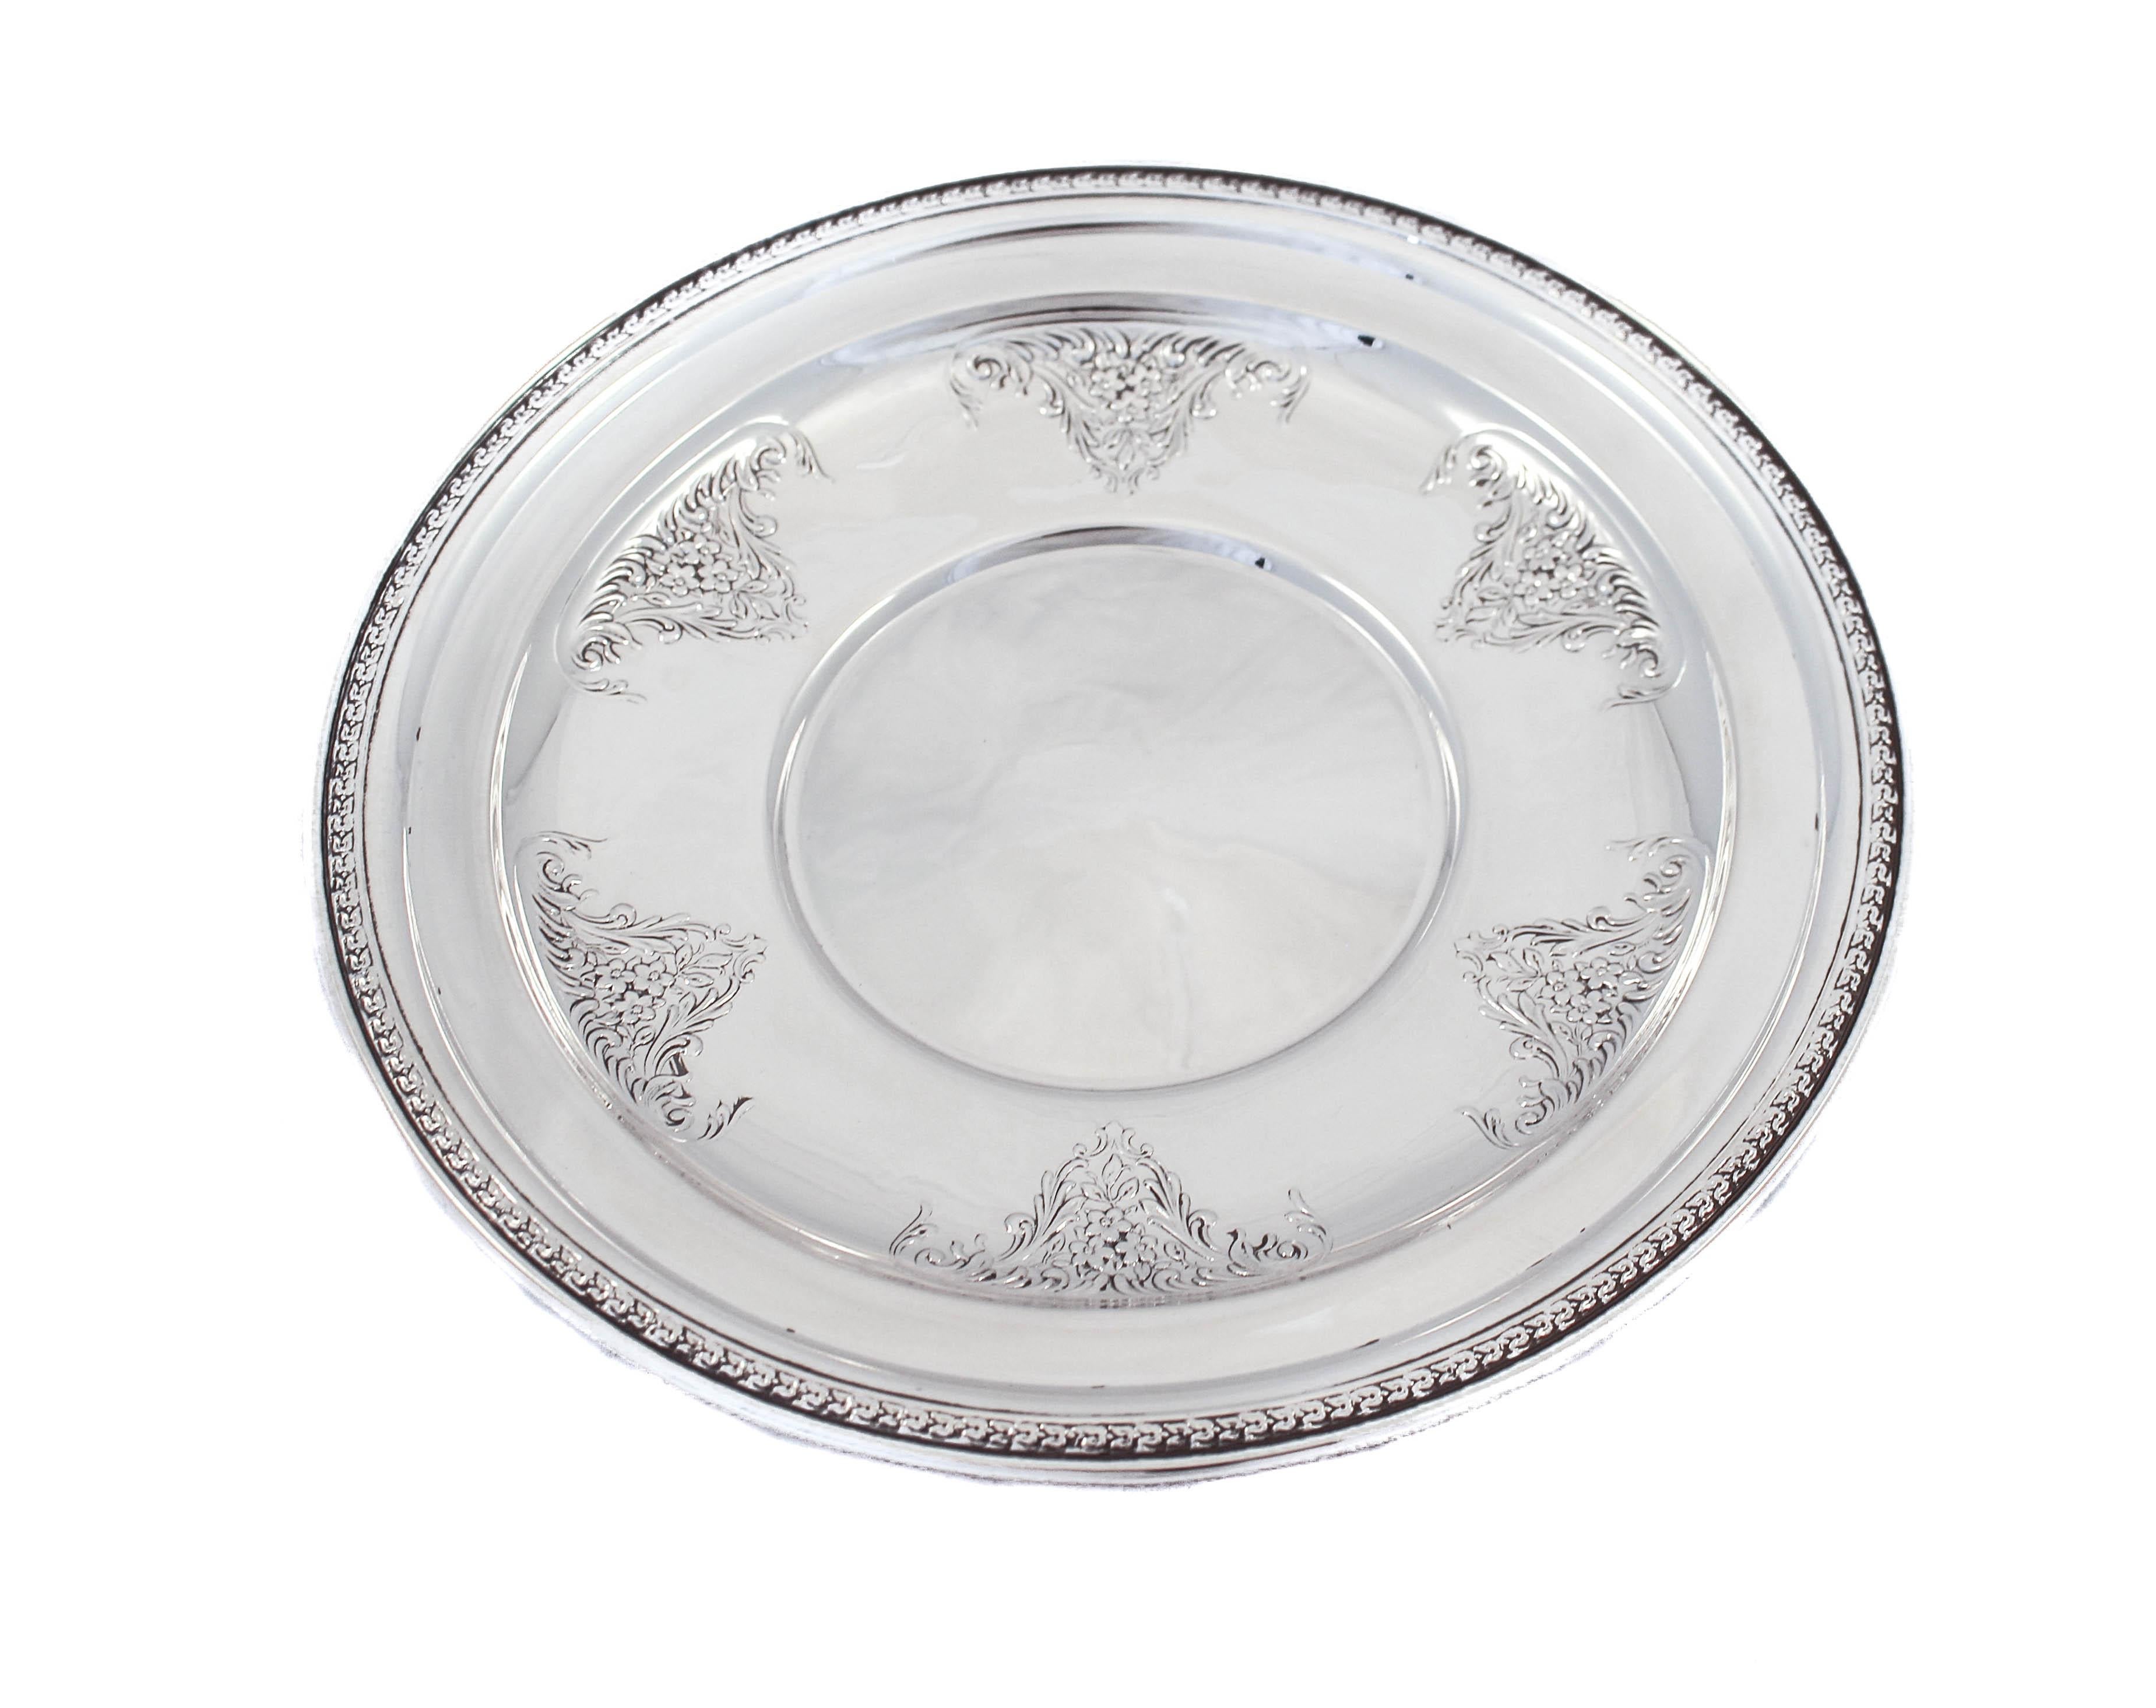 Being offered is a sterling silver dish made by the Manchester Manufacturing Company of Providence, Rhode Island. It’s an elegant piece with six bouquets of flowers encircling the inside edge. Around the outer rim there is a very subtle gadroon